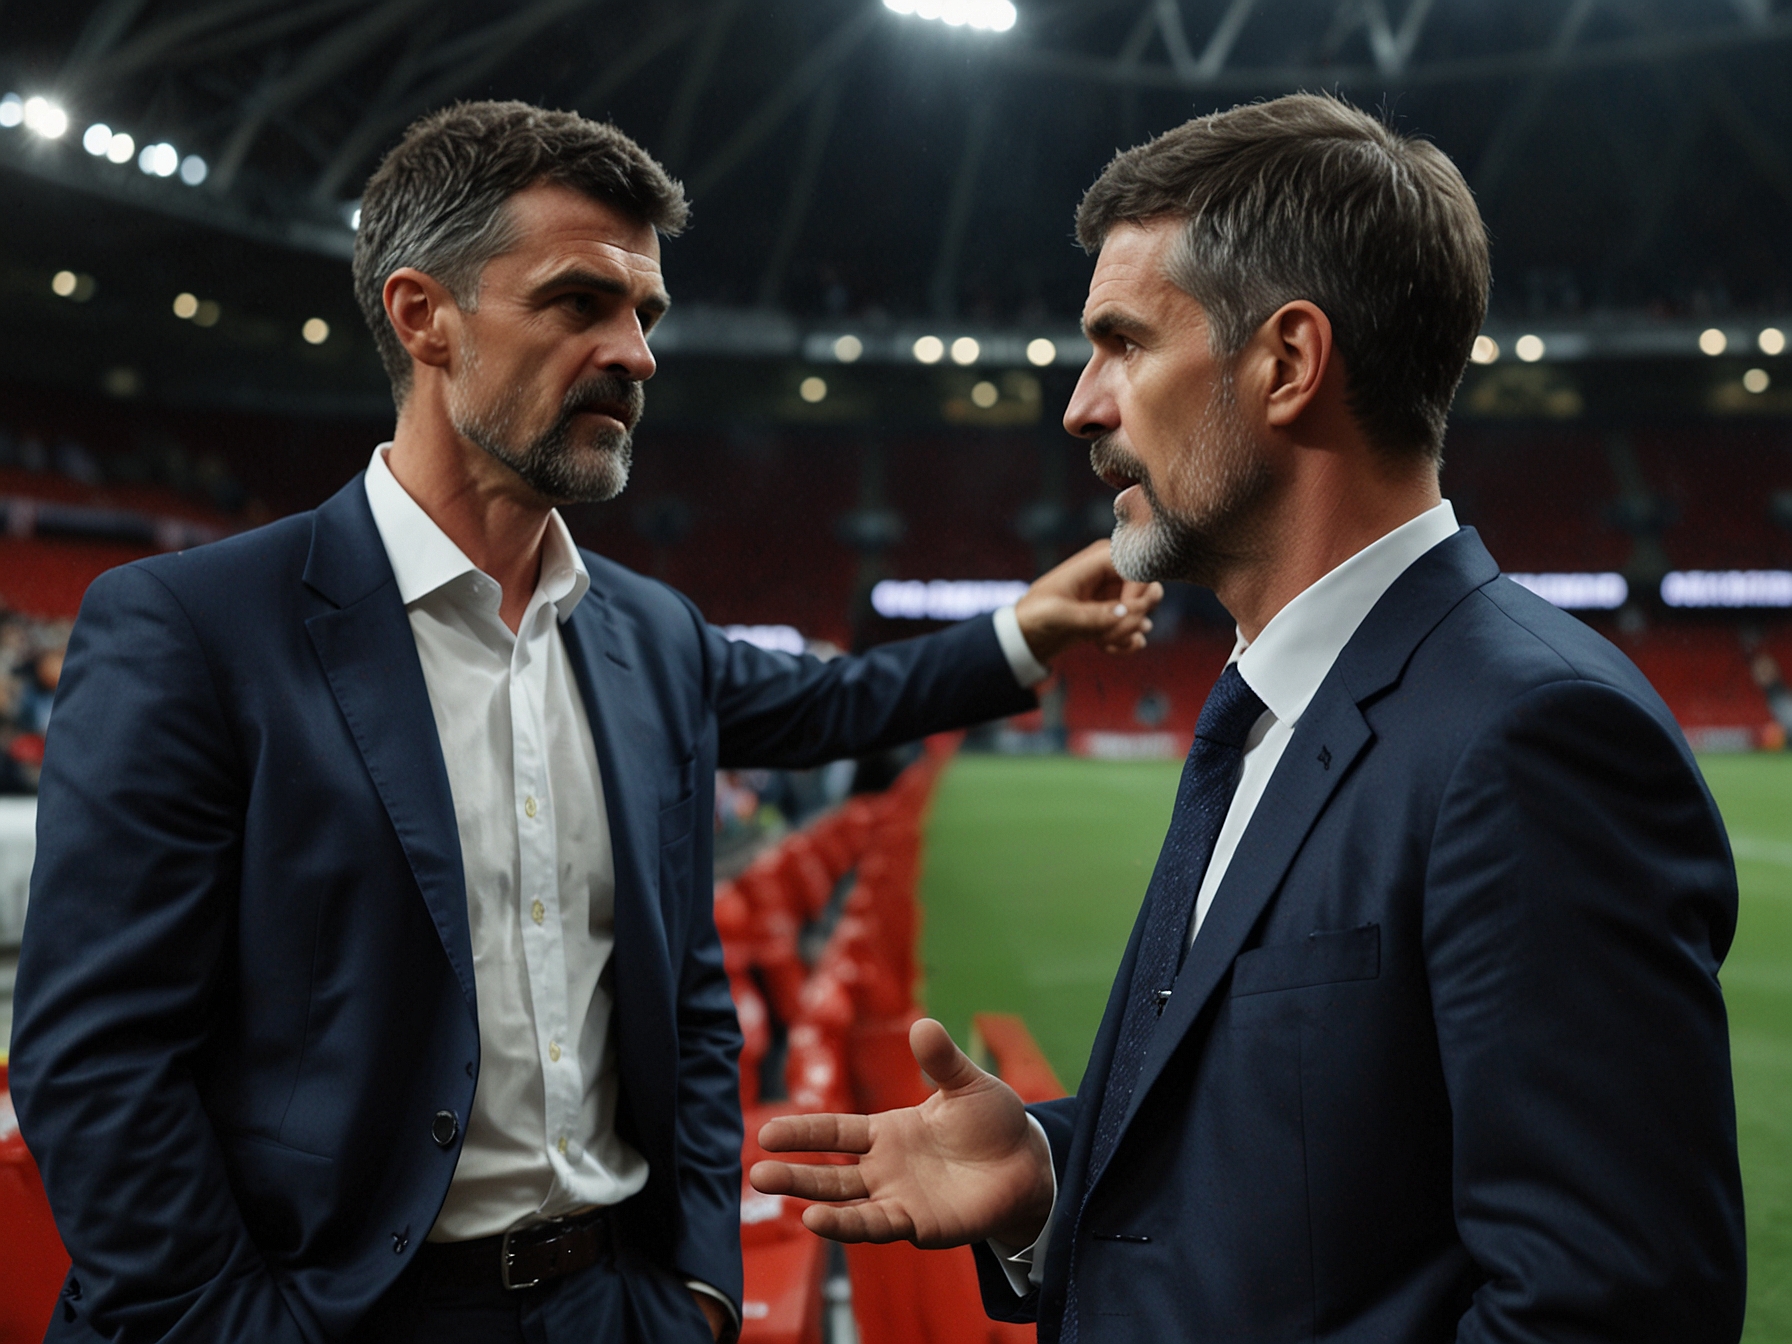 Roy Keane passionately speaking during a post-match analysis, highlighting concerns about an underperforming England player and pointing out tactical flaws by manager Gareth Southgate.